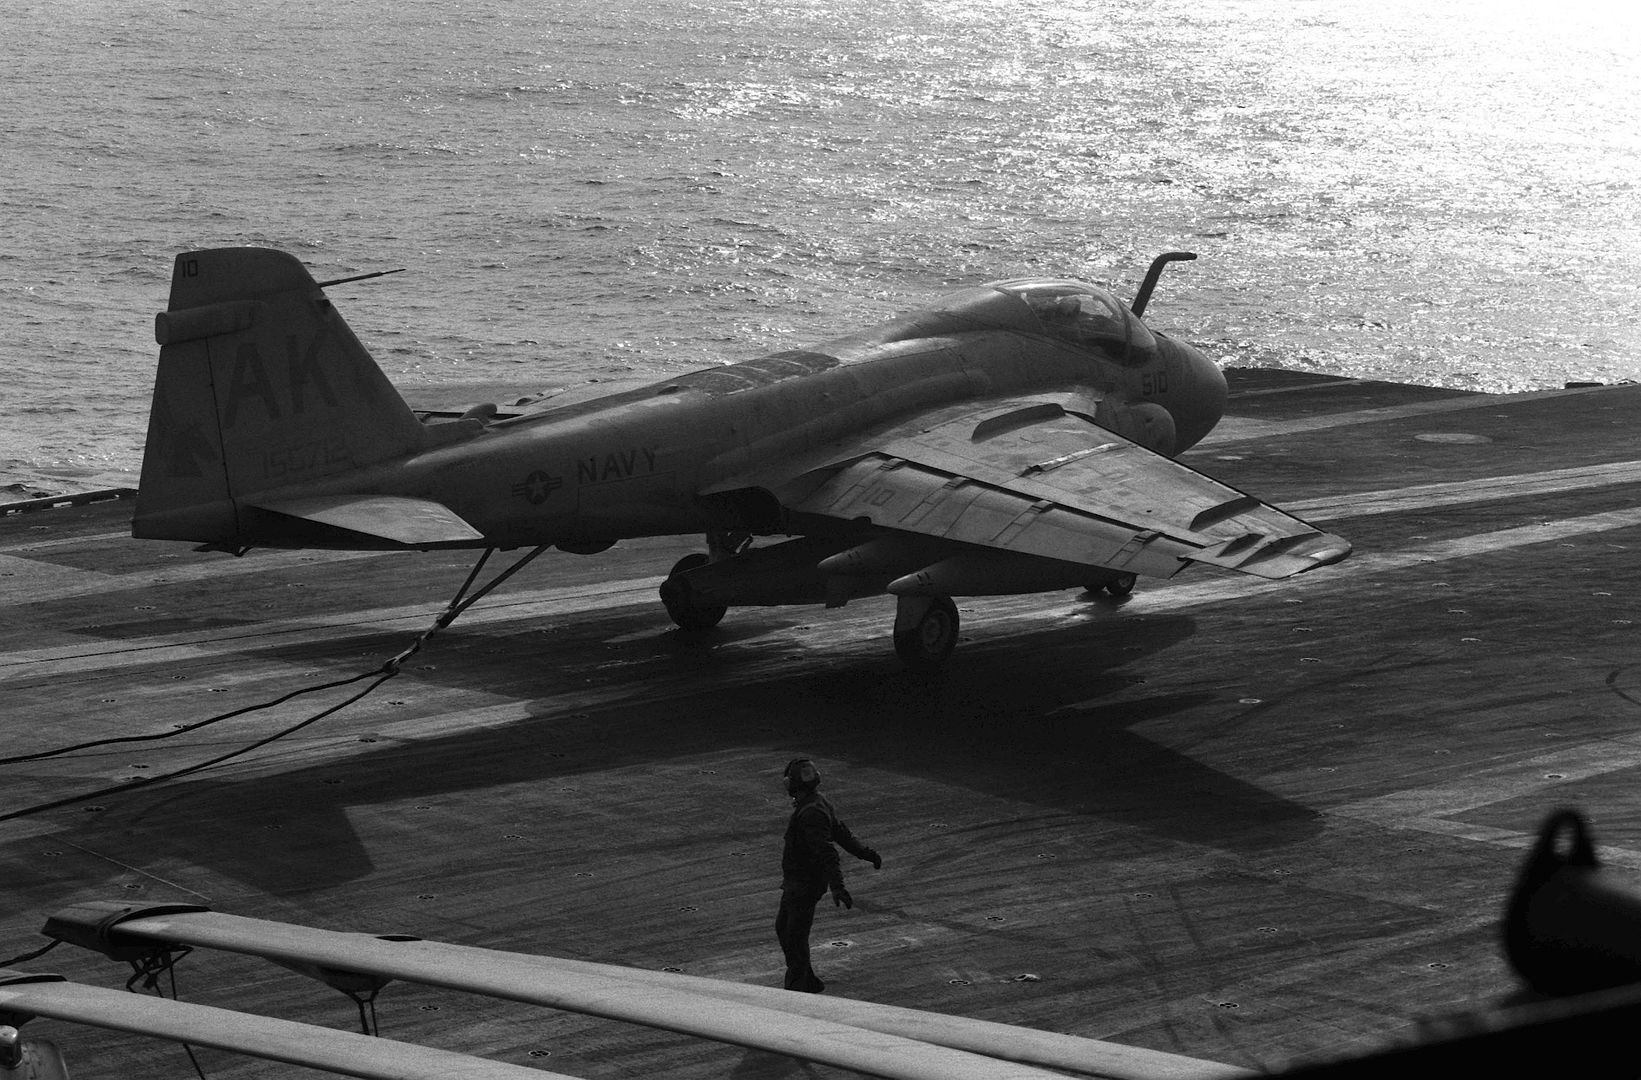 An A 6E Intruder Aircraft Shortly After Landing On The Flight Deck Of The Aircraft Carrier USS CORAL SEA